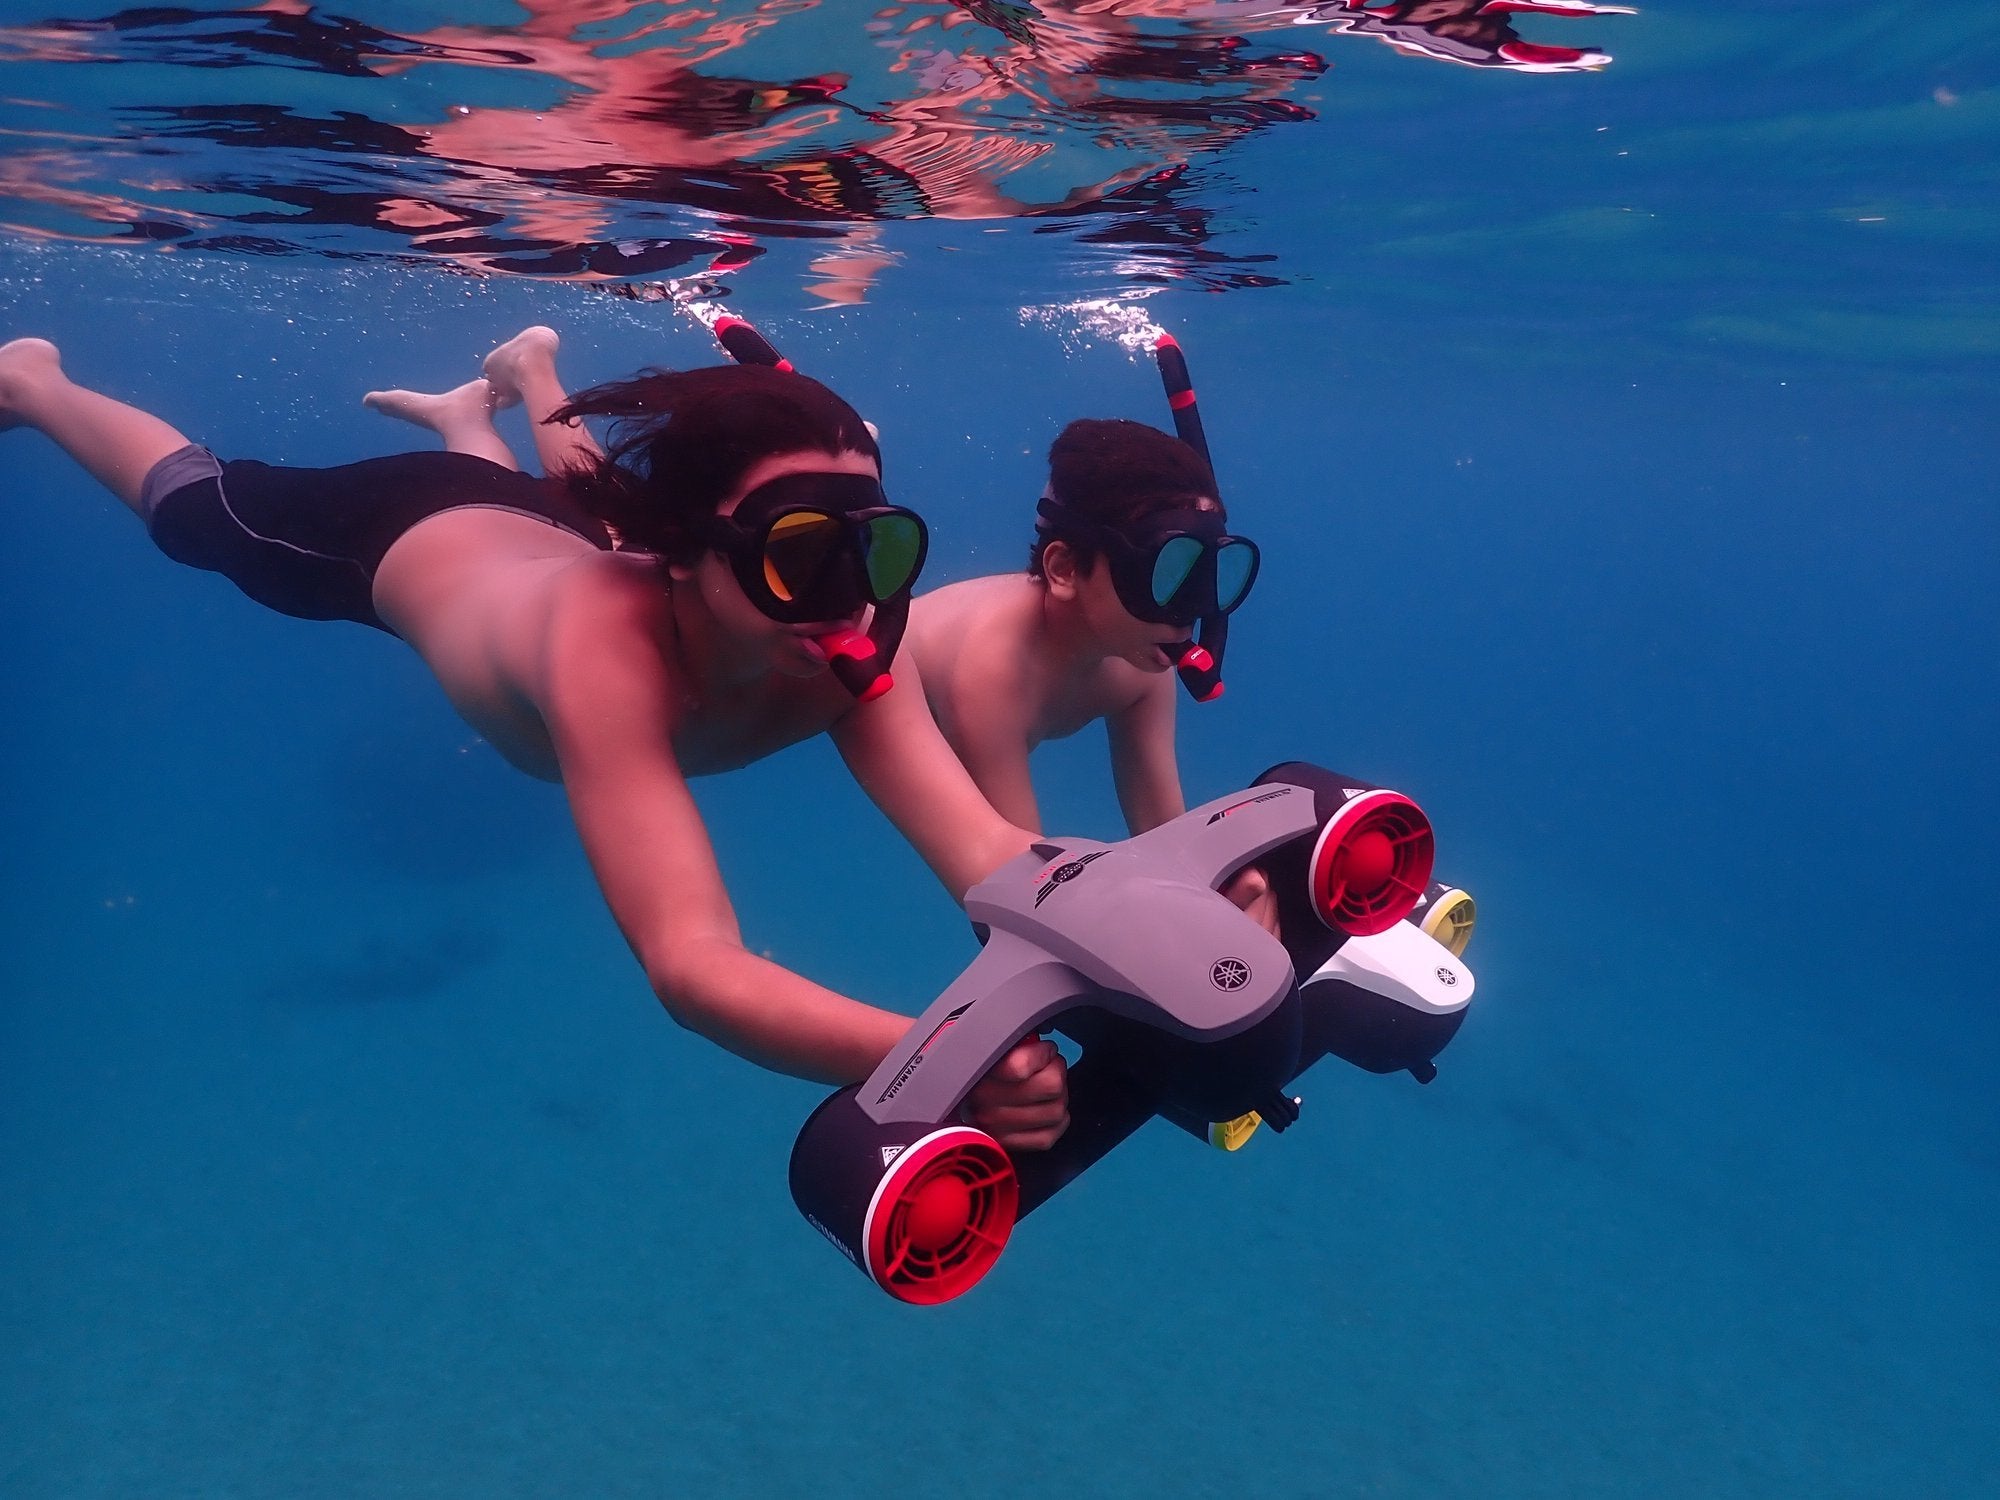 2 young boys use their Yamaha Seawing 2 on their snorkeling adventure. One boy has the red/grey Seawing the other has the yellow/white Seawing 2.